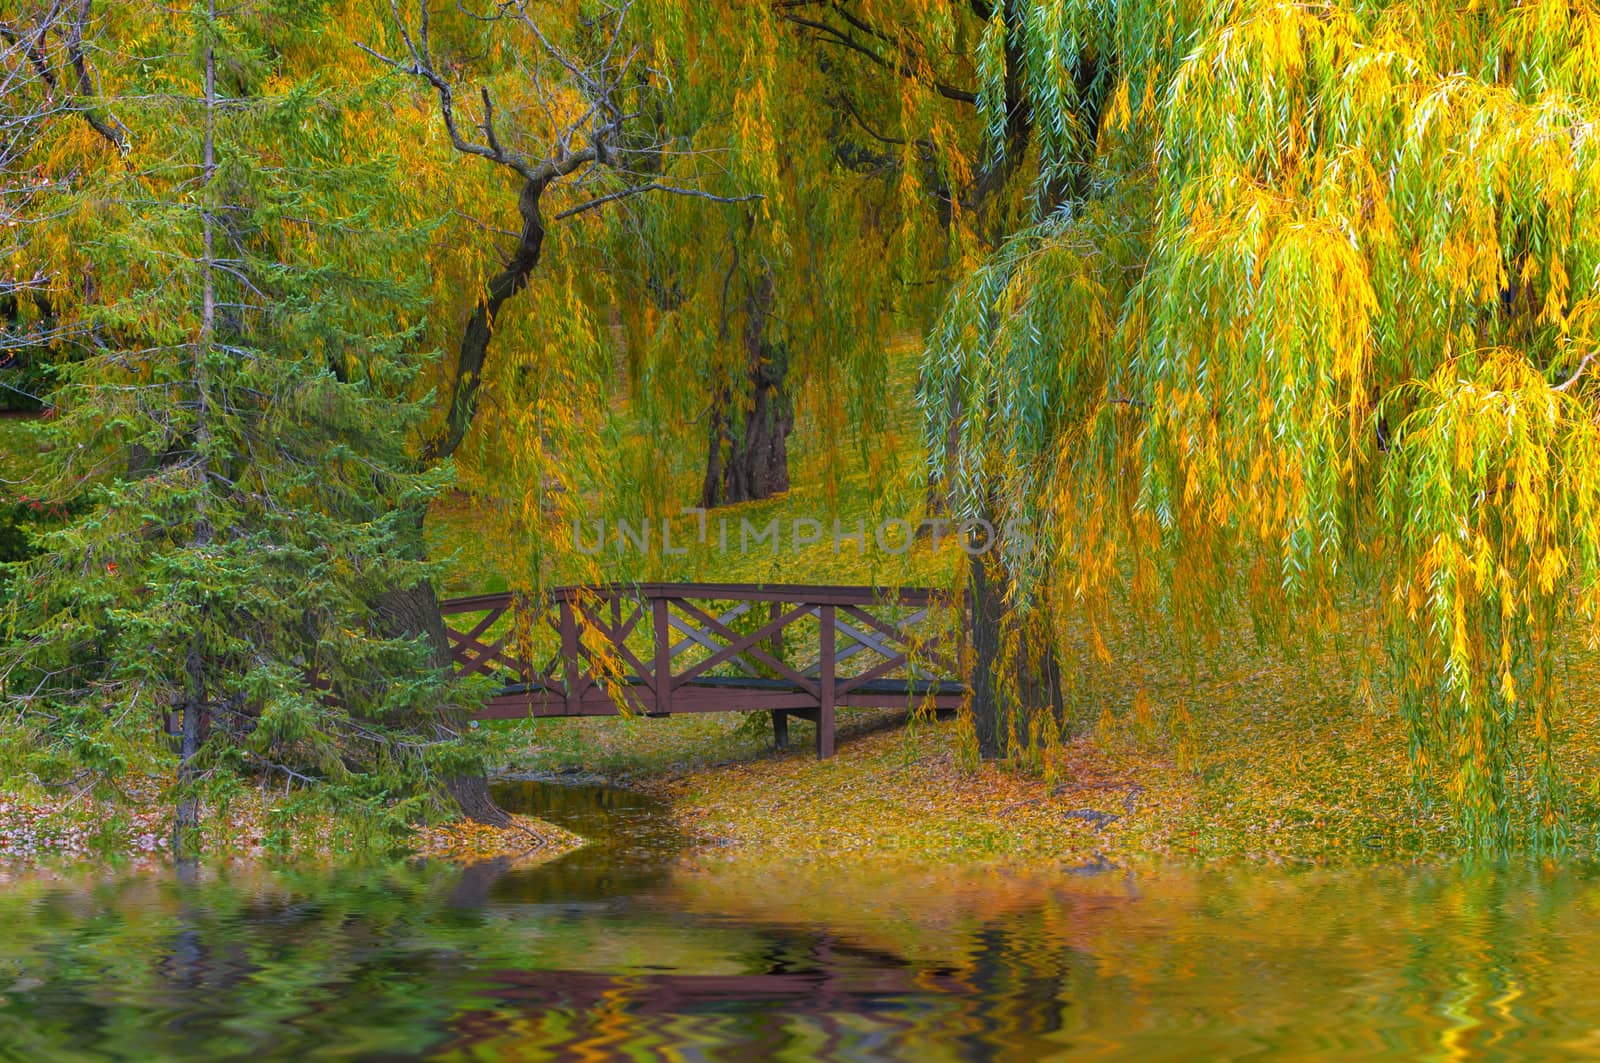 Autumn - Small bridge colorfull foliage reflection in the water